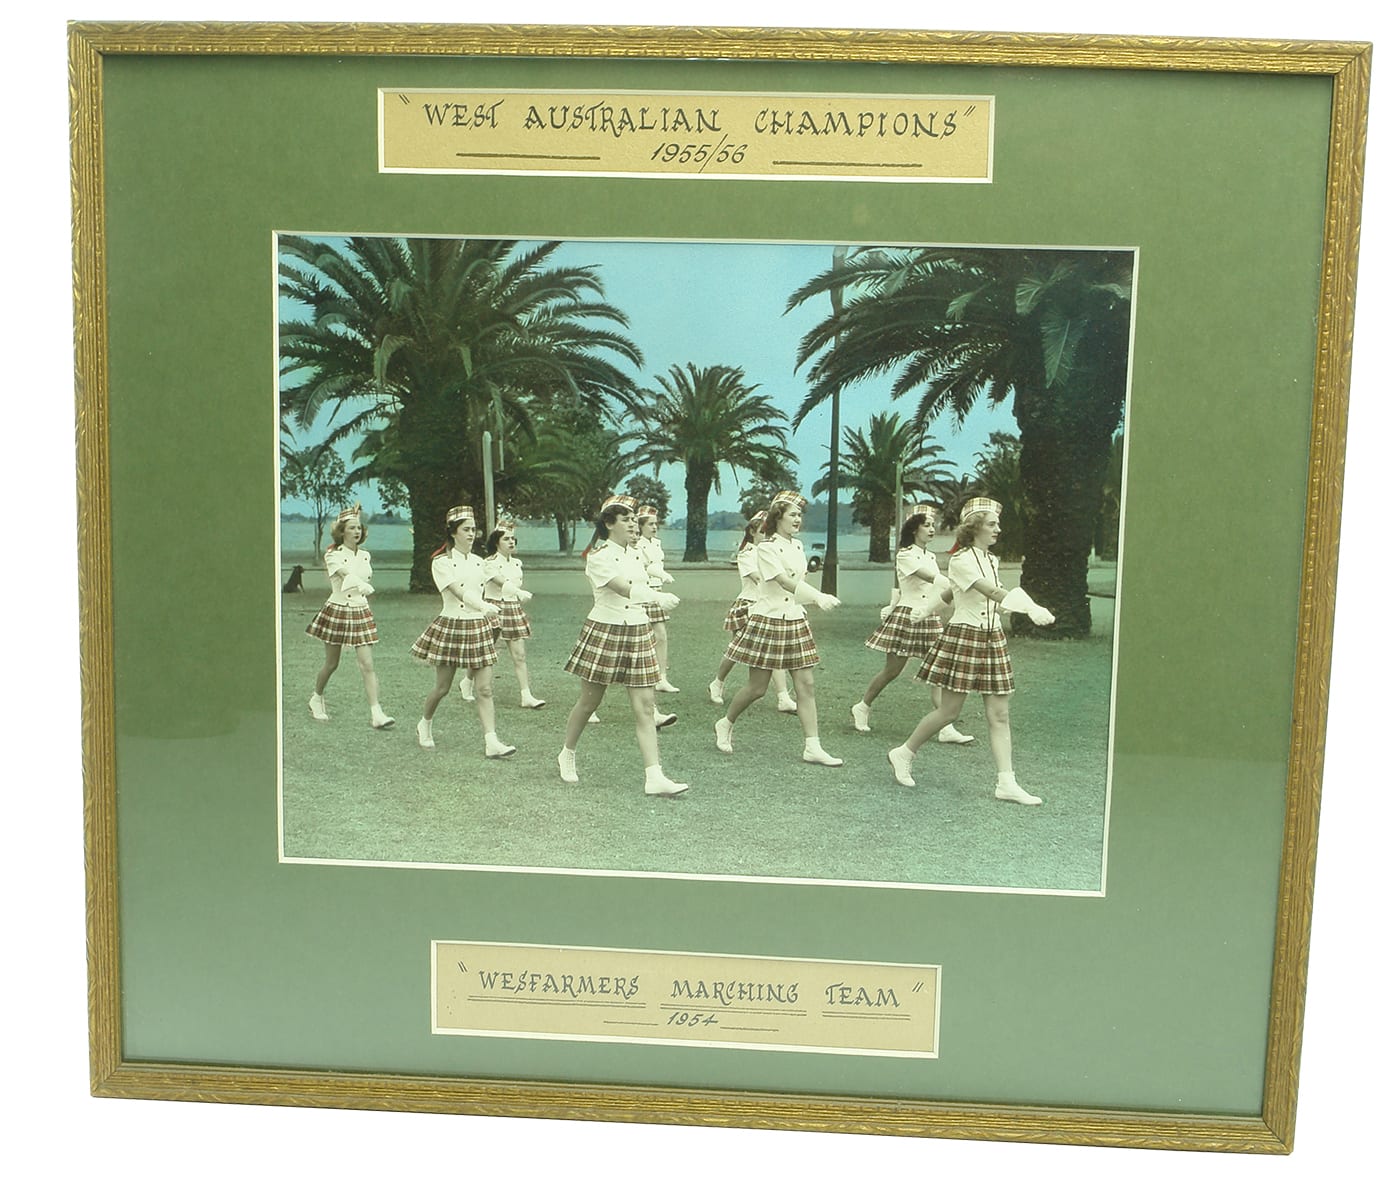 Wesfarmers Marching Team 1954 Western Australian Champions Framed Photograph